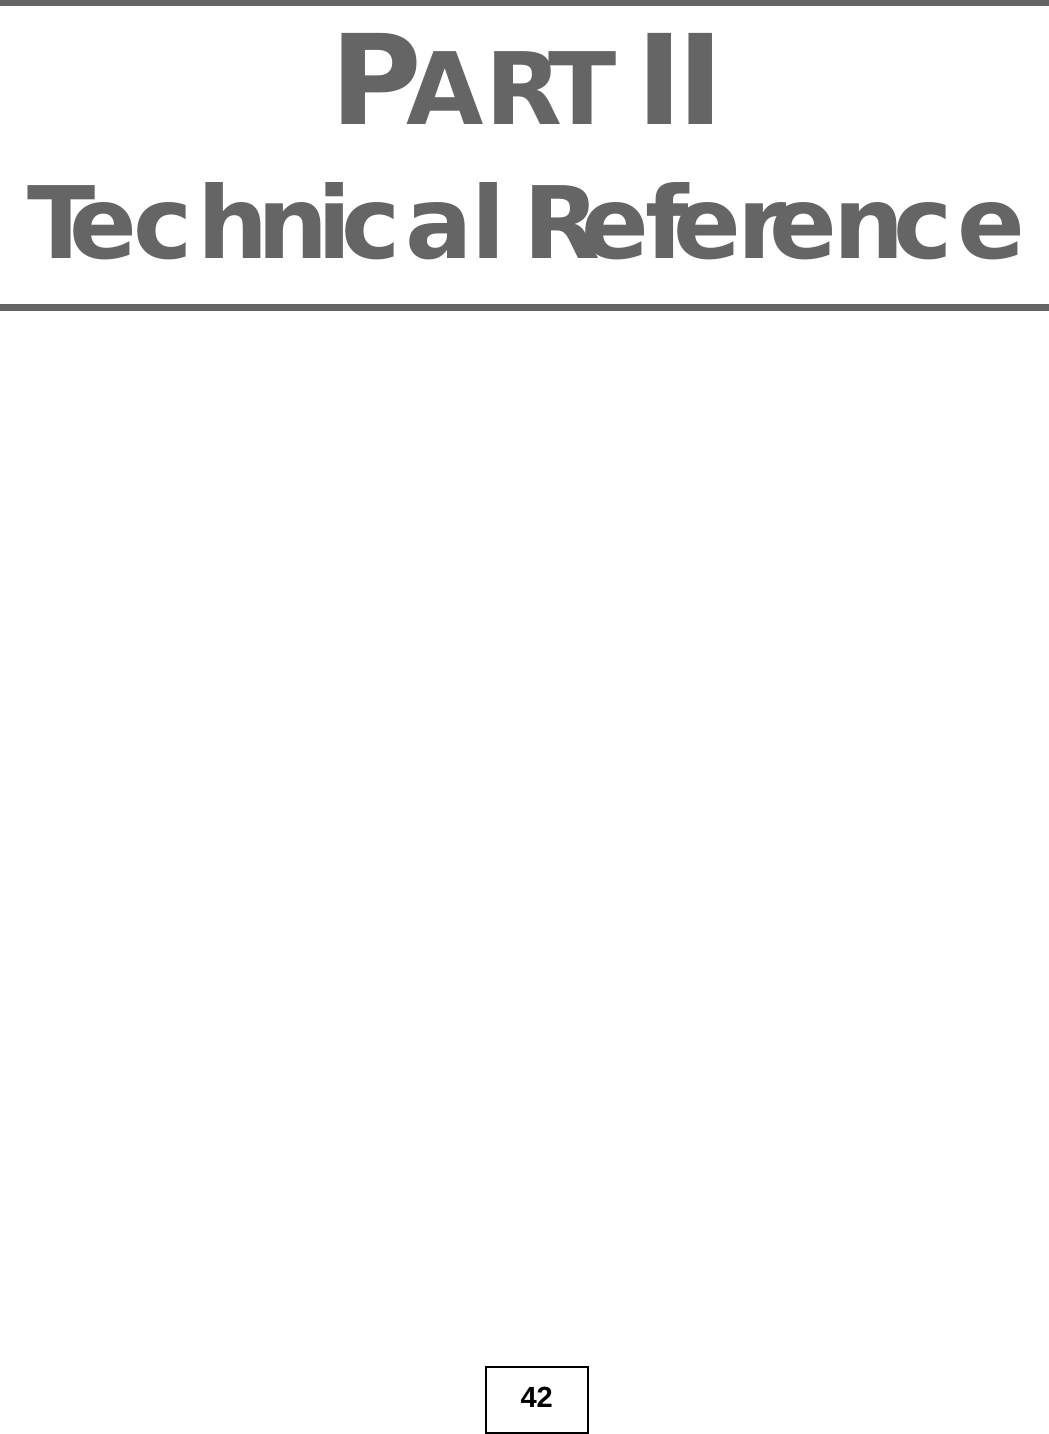 42PART IITechnical Reference